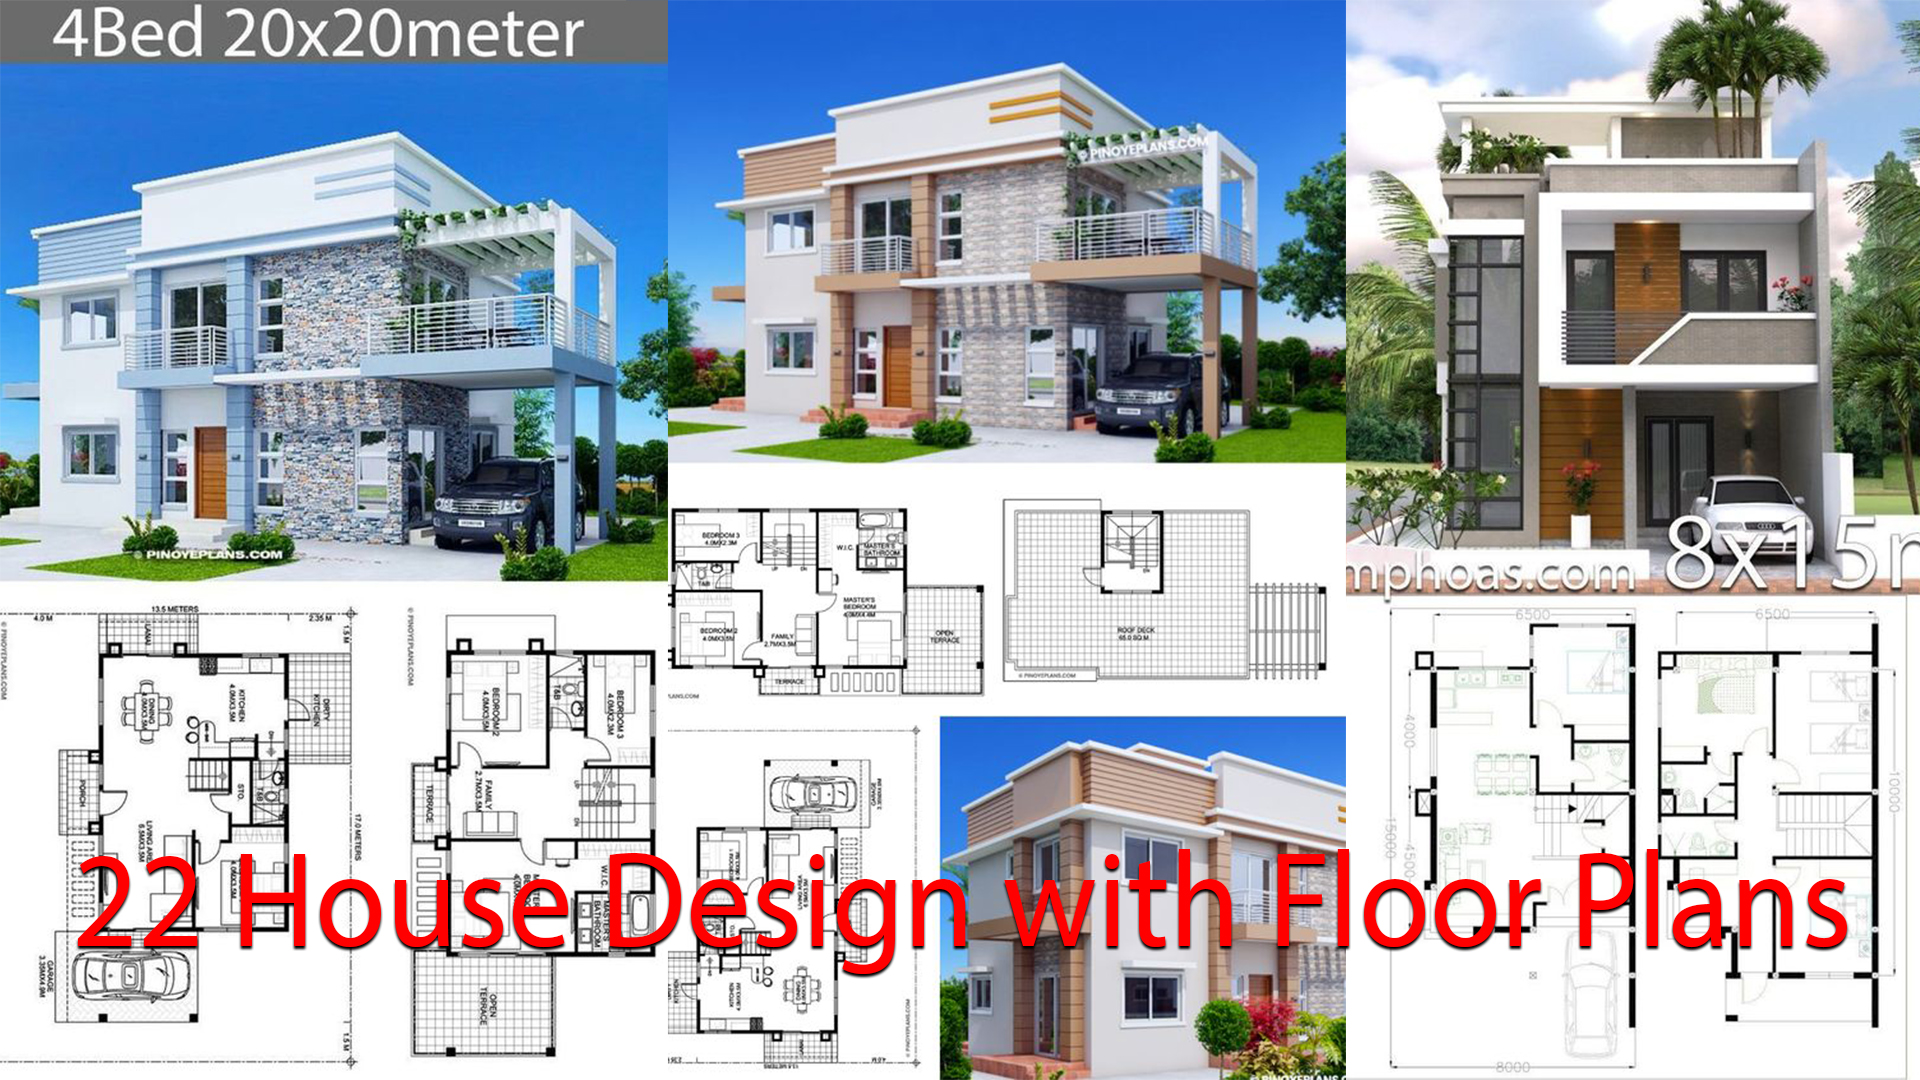 22 House design with floor plans you will love